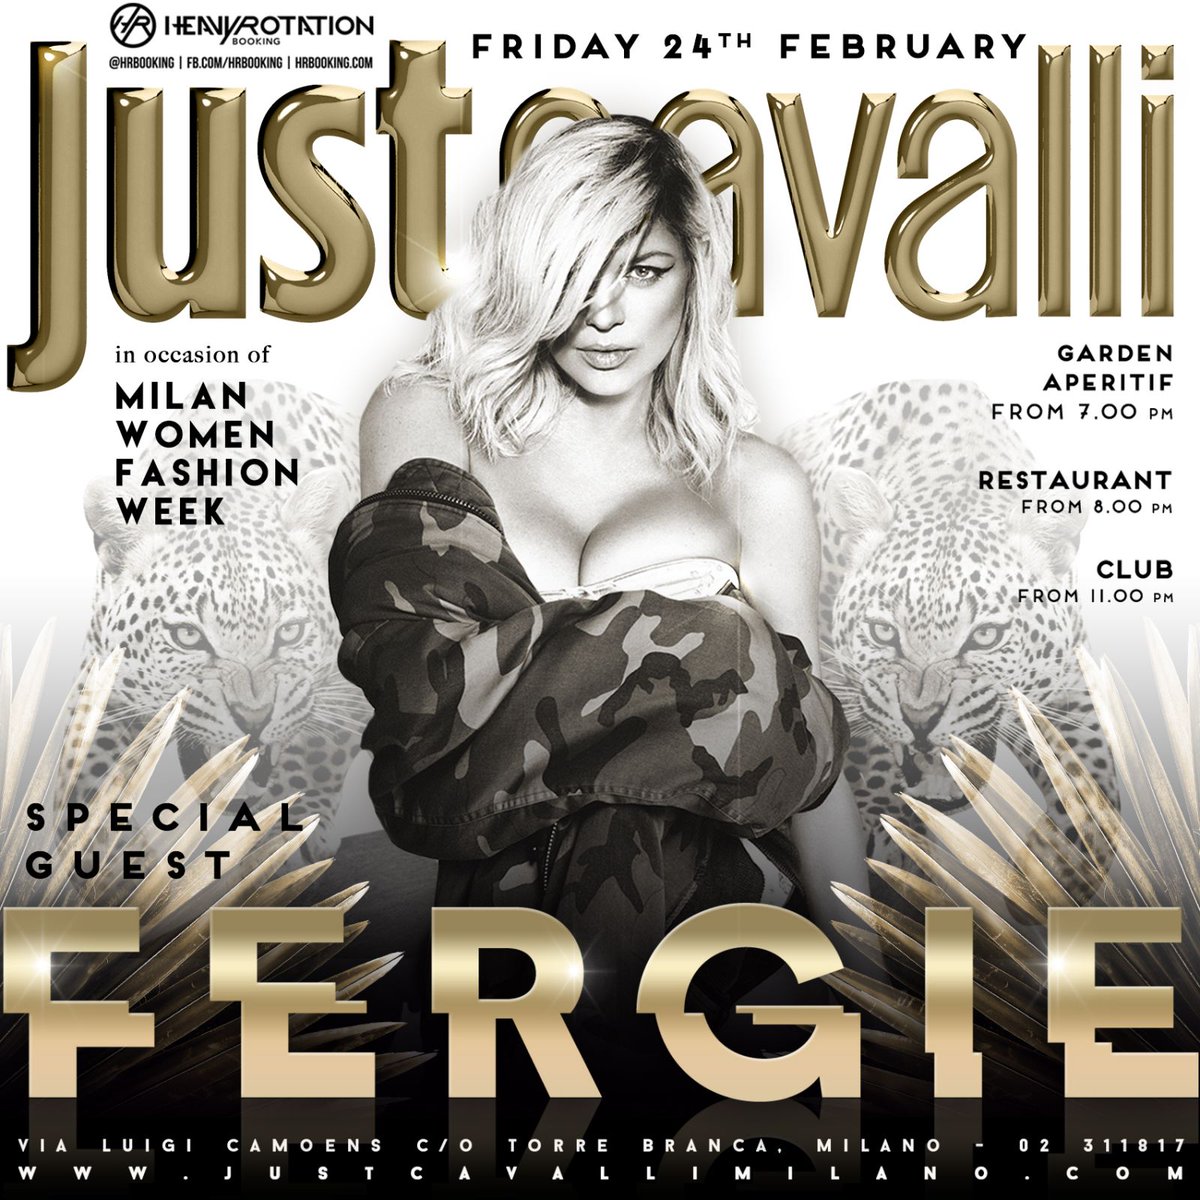 Friday the 24th February Fashion Week after party @JustCavalliClub with @Fergie do not miss it. #JustCavalliMilano #FashionWeek #hrbooking